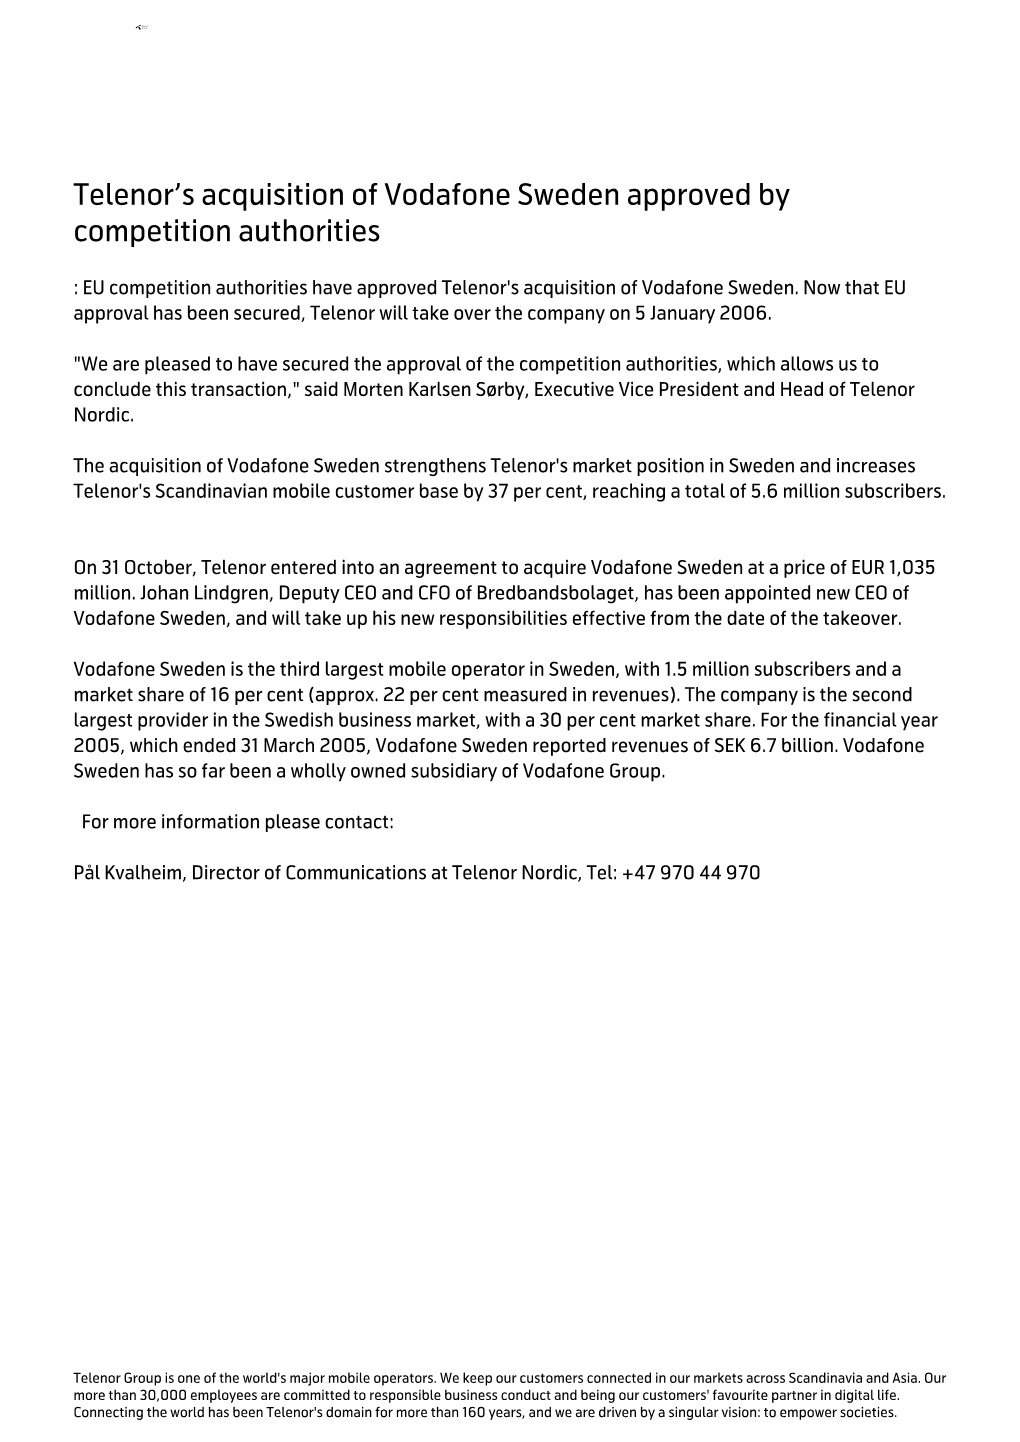 S Acquisition of Vodafone Sweden Approved by Competition Authorities